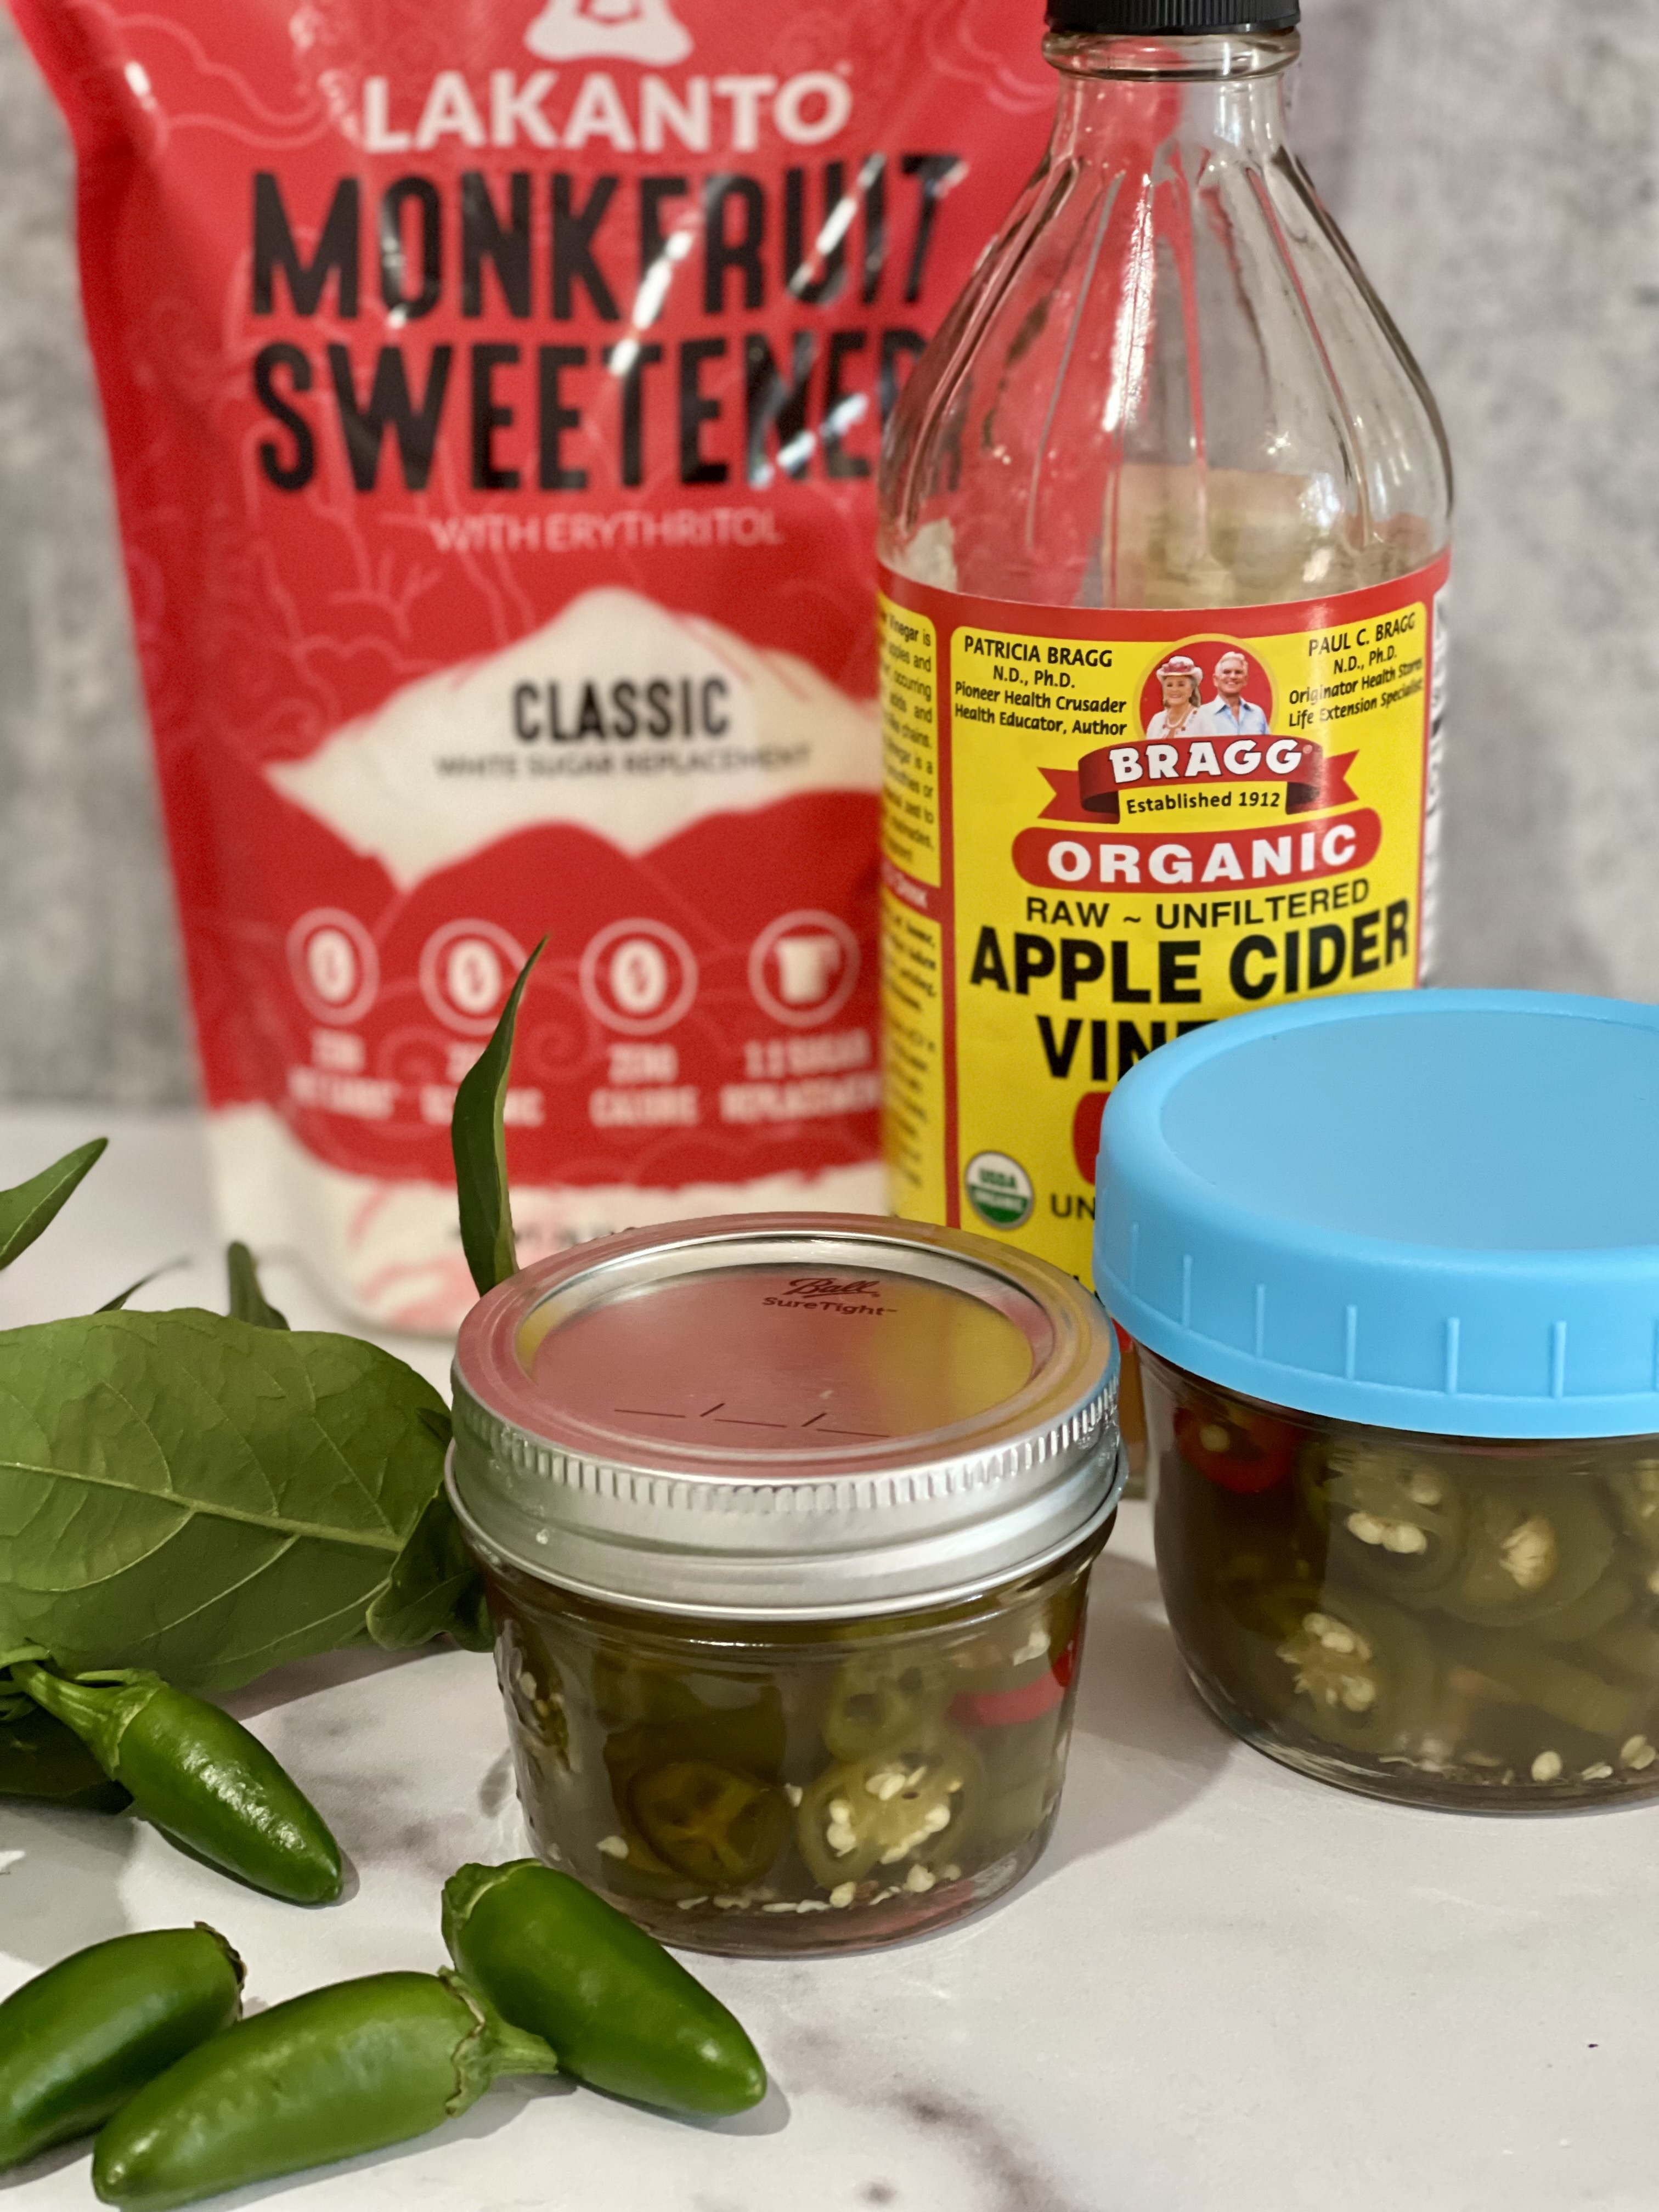 Discover how to make Sugar-Free Candied Jalapeños using no calorie monkfruit sweetener instead of sugar. They're sweet and spicy and virtually indistinguishable from the store-bought version. | www.grownupdish